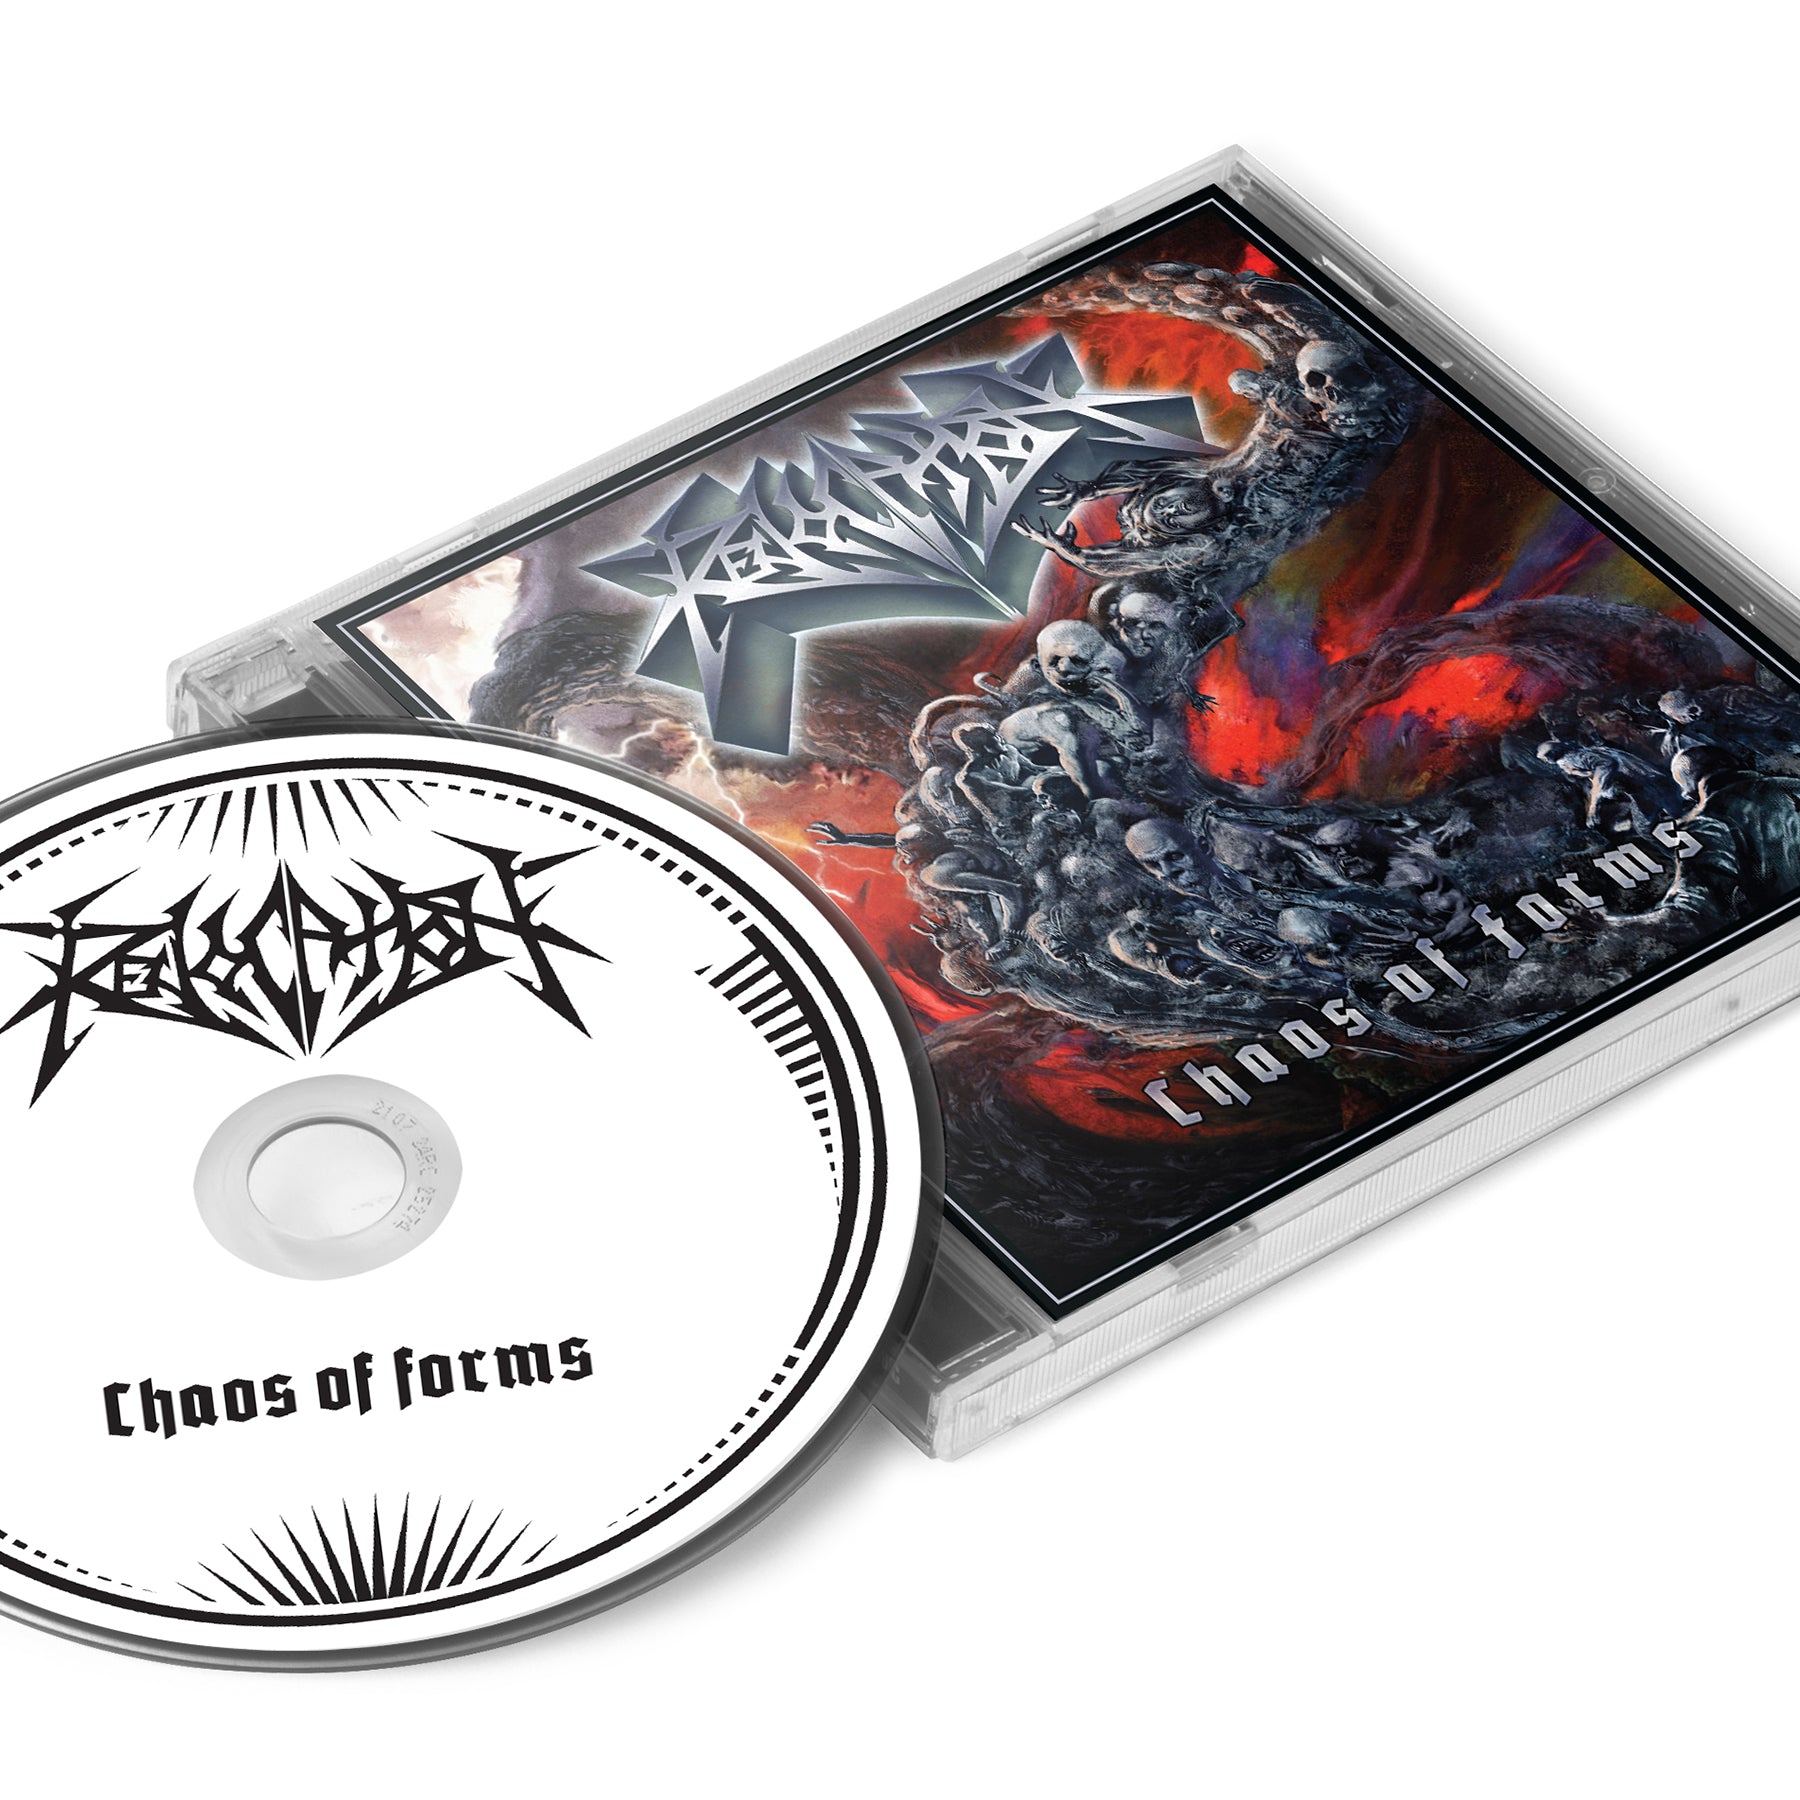 Revocation "Chaos of Forms" CD